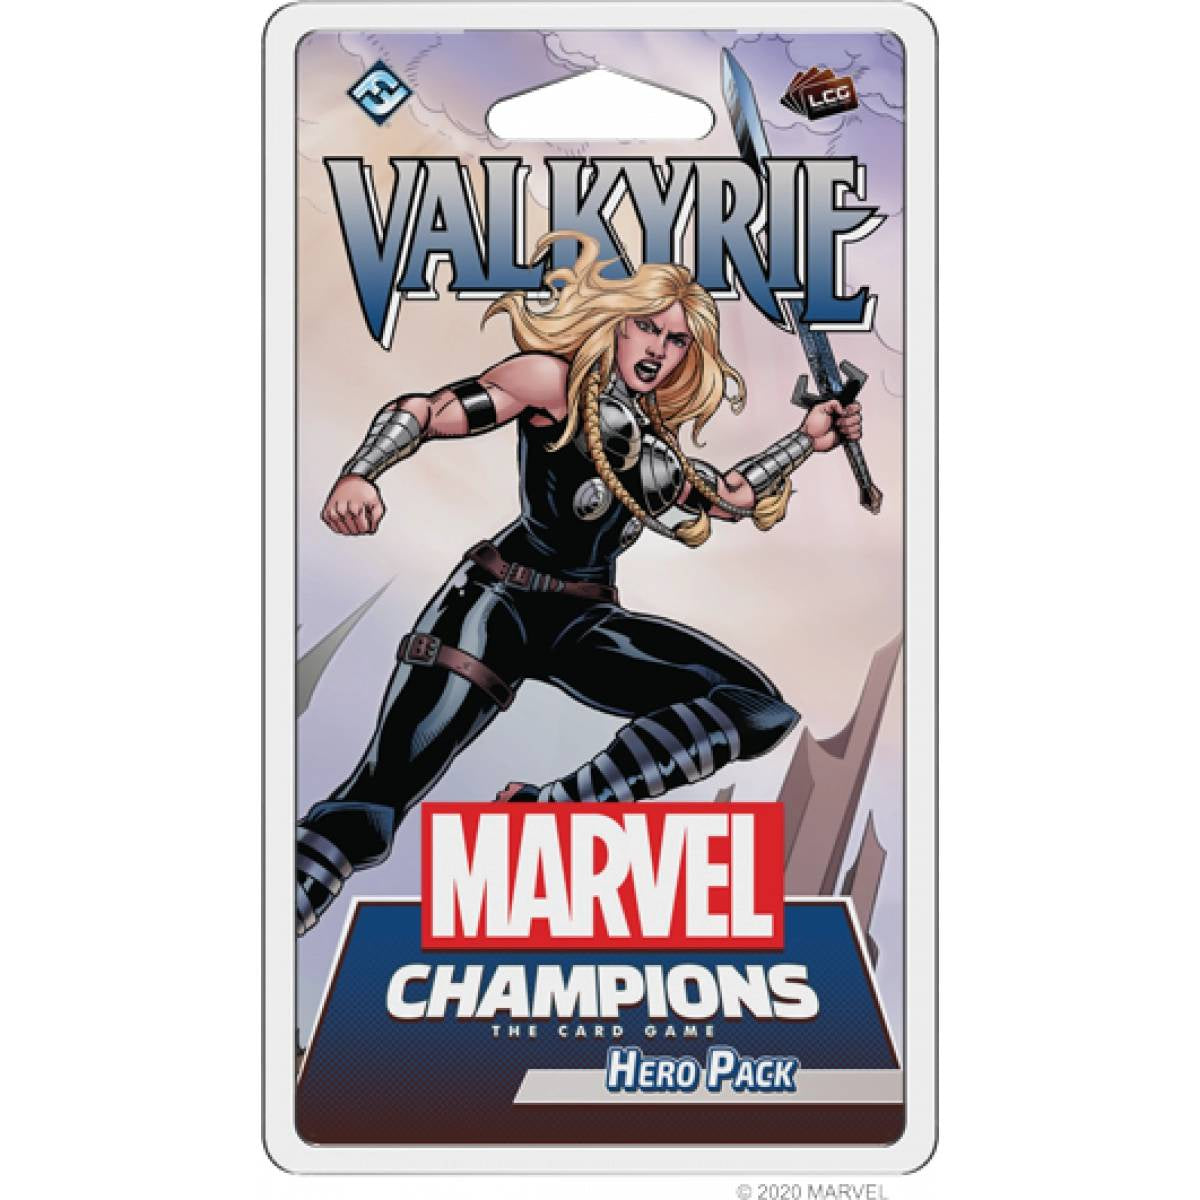 Marvel Champions The Card Game - Valkyrie Hero Pack